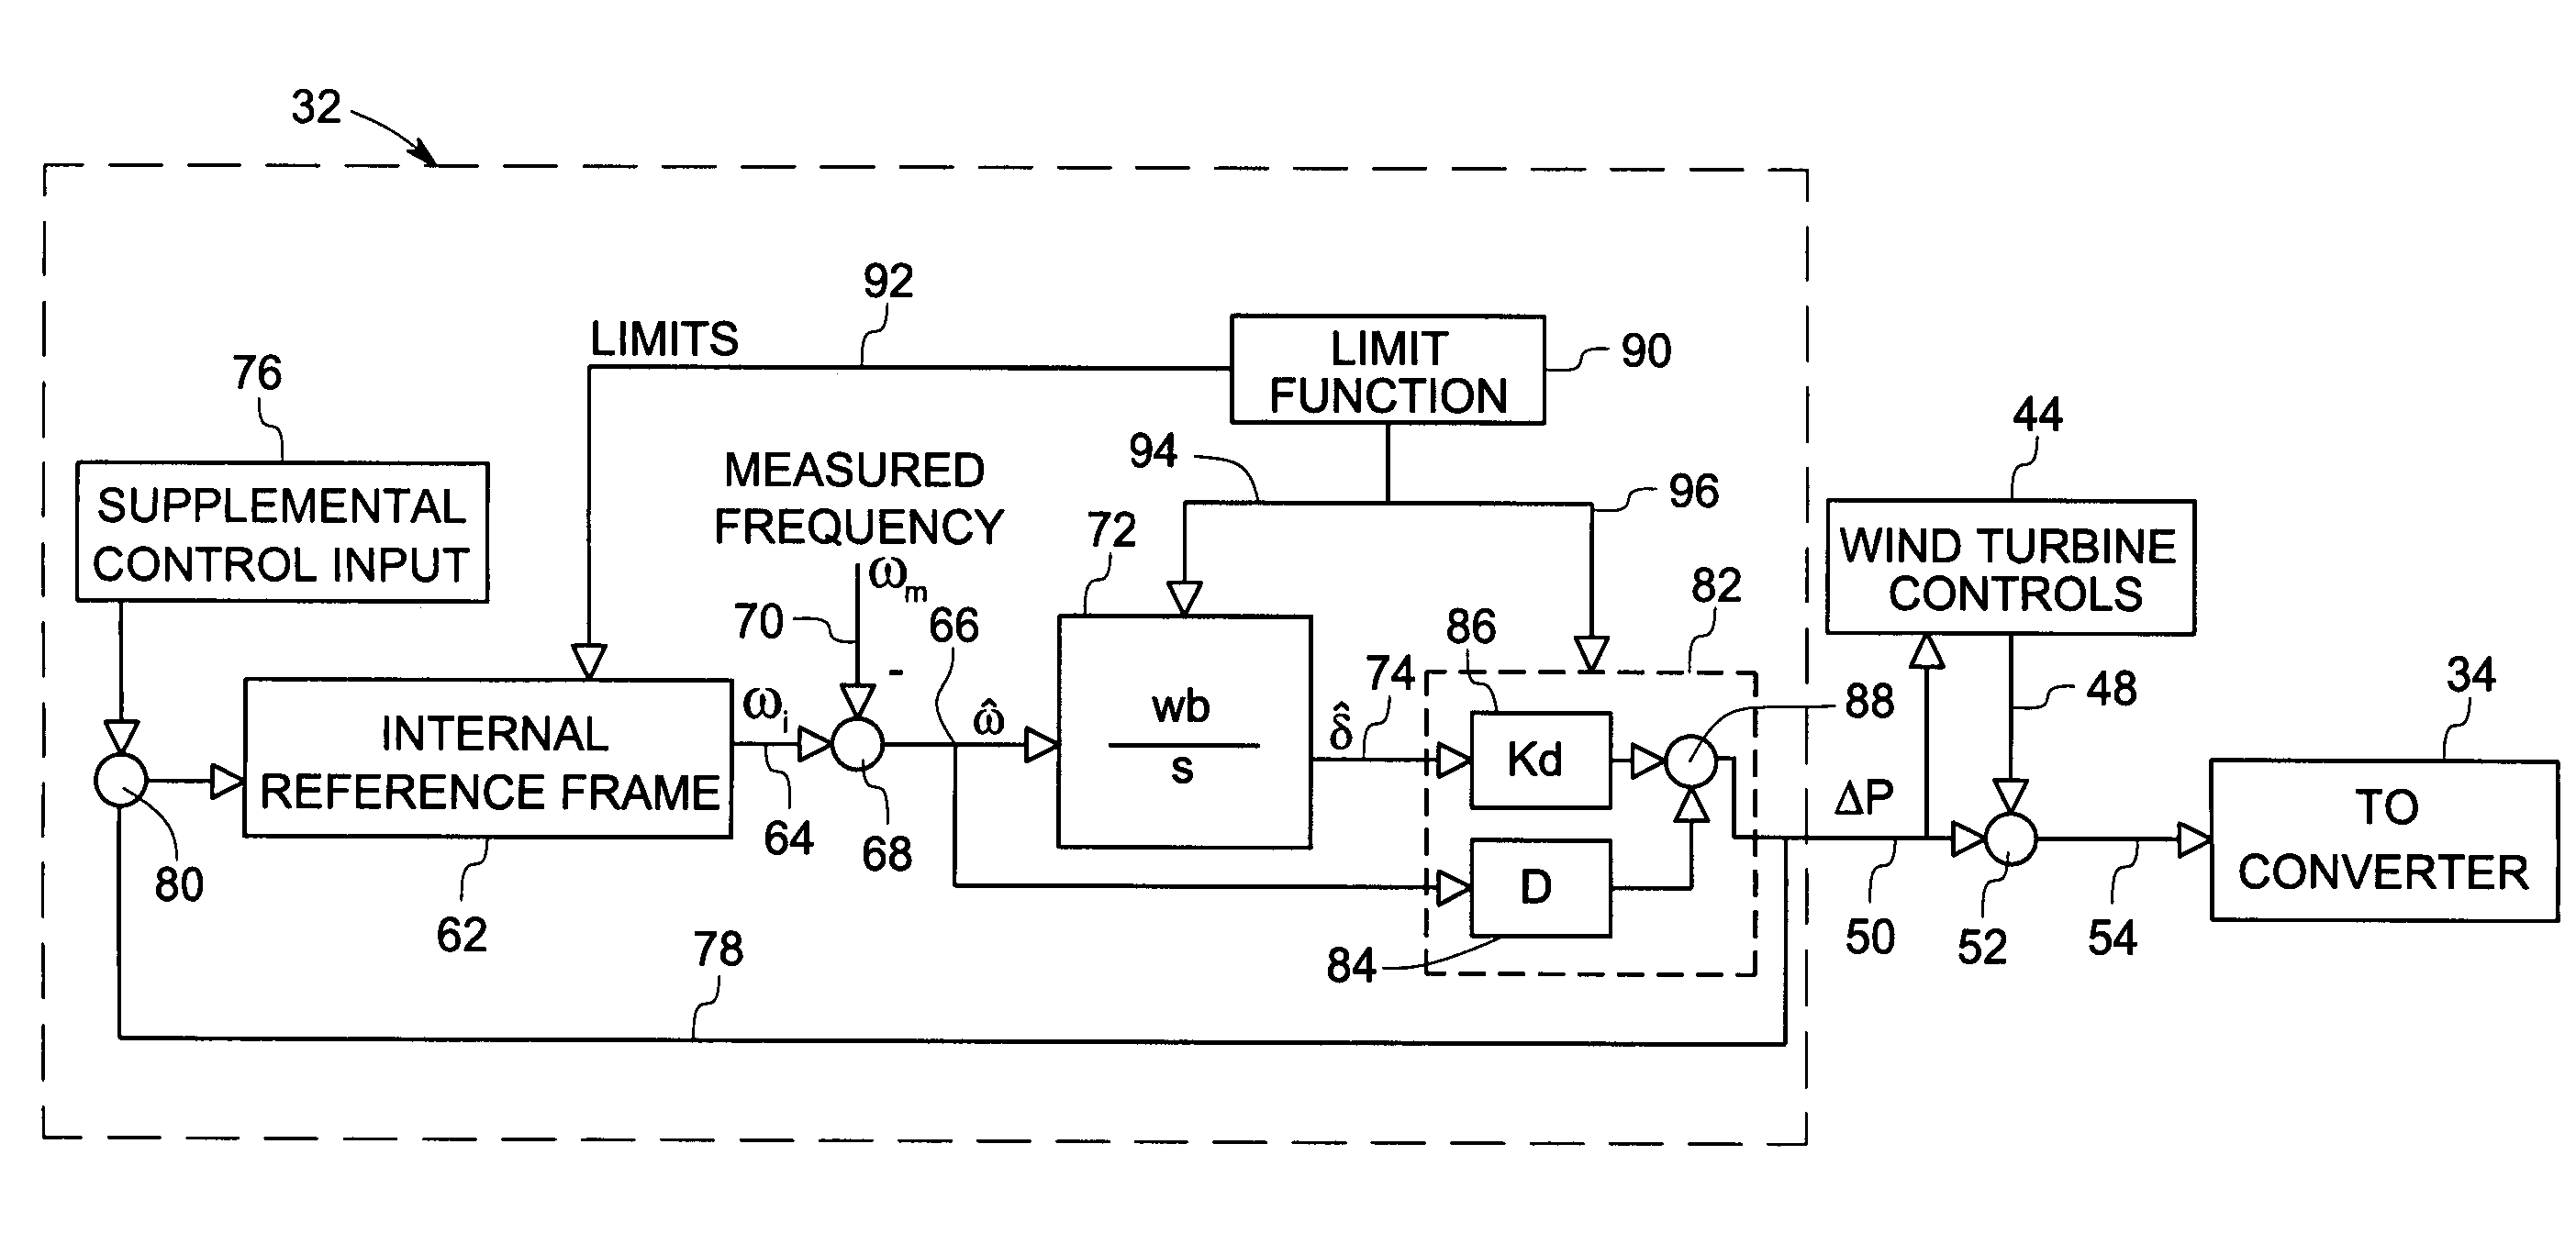 System and method for utility and wind turbine control